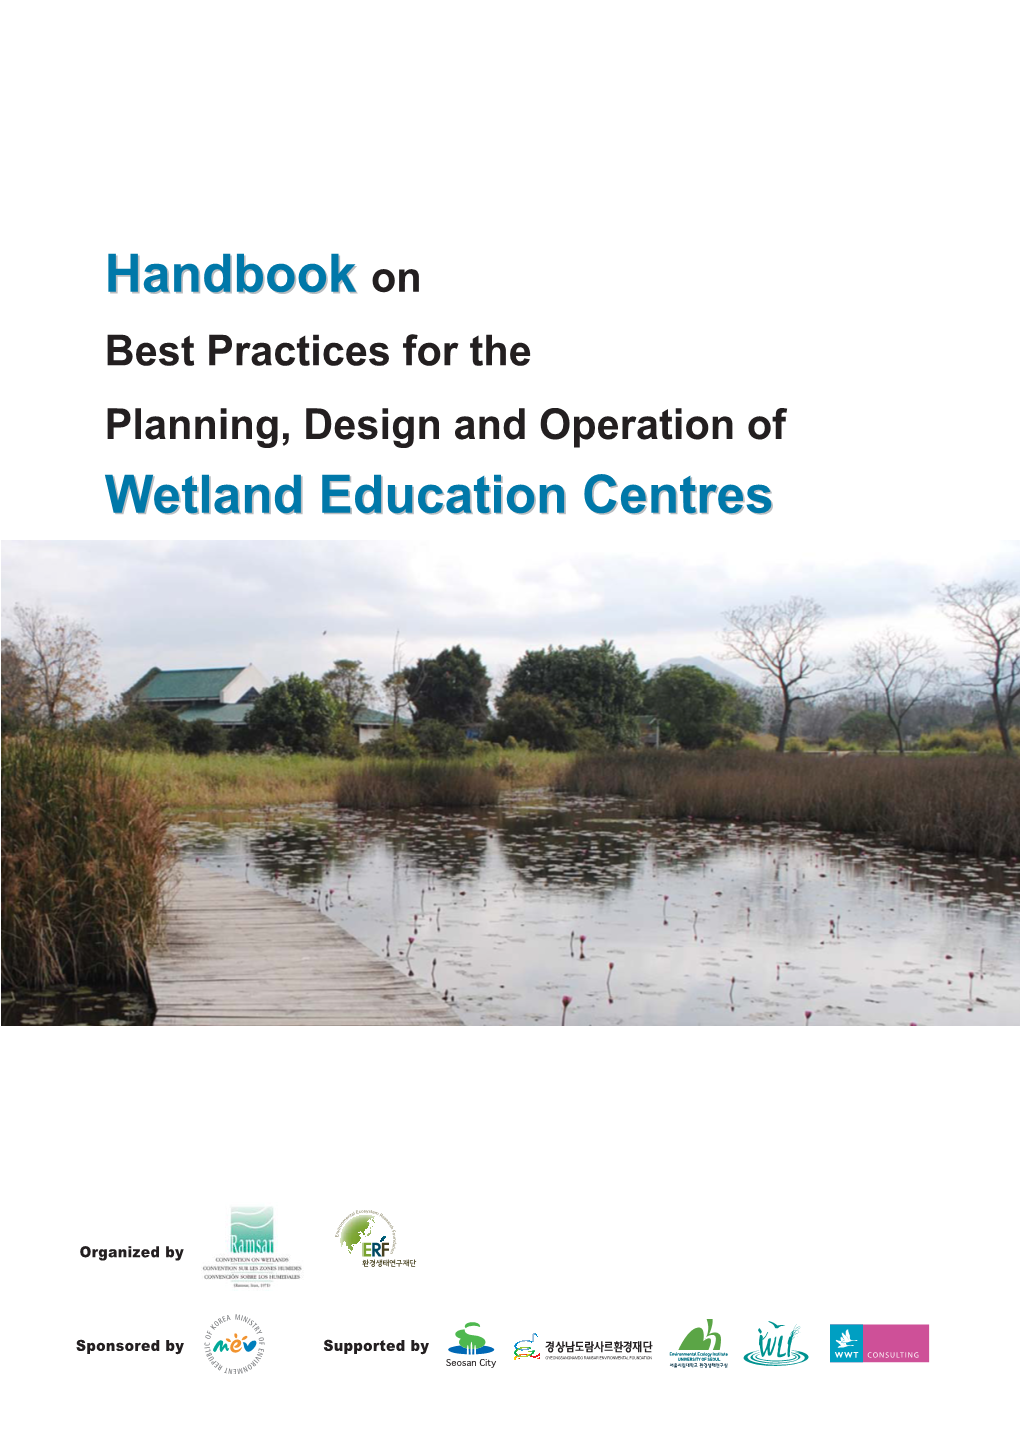 Handbook on Best Practices for the Planning, Design and Operation of Wetland Education Centres